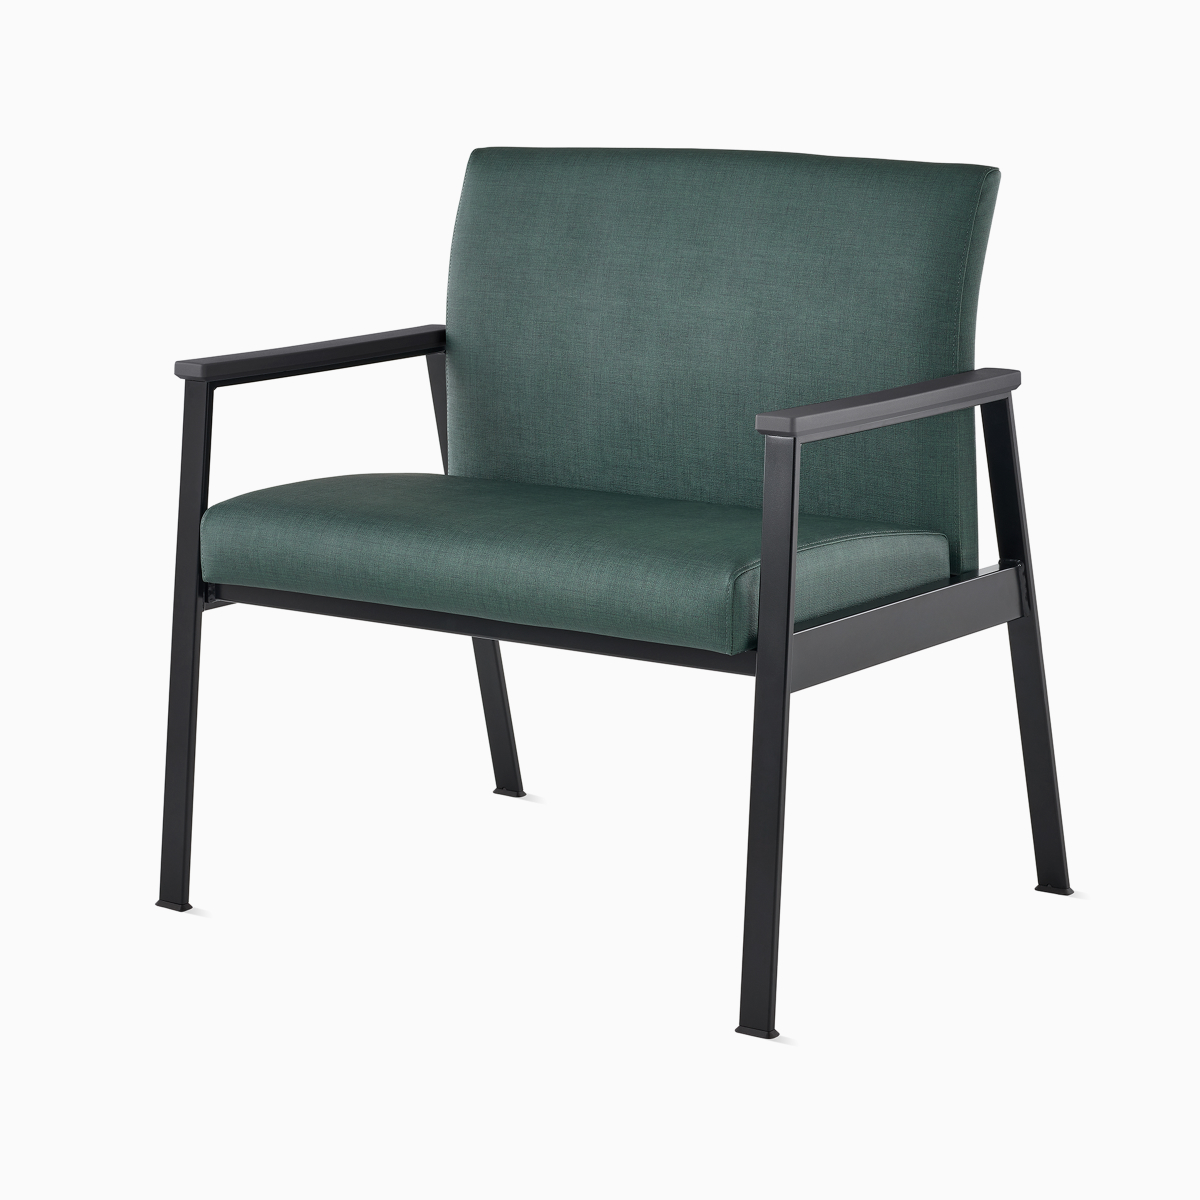 Front-angle view of an Easton Plus Chair with green upholstery, black four-leg base, and black arm caps.